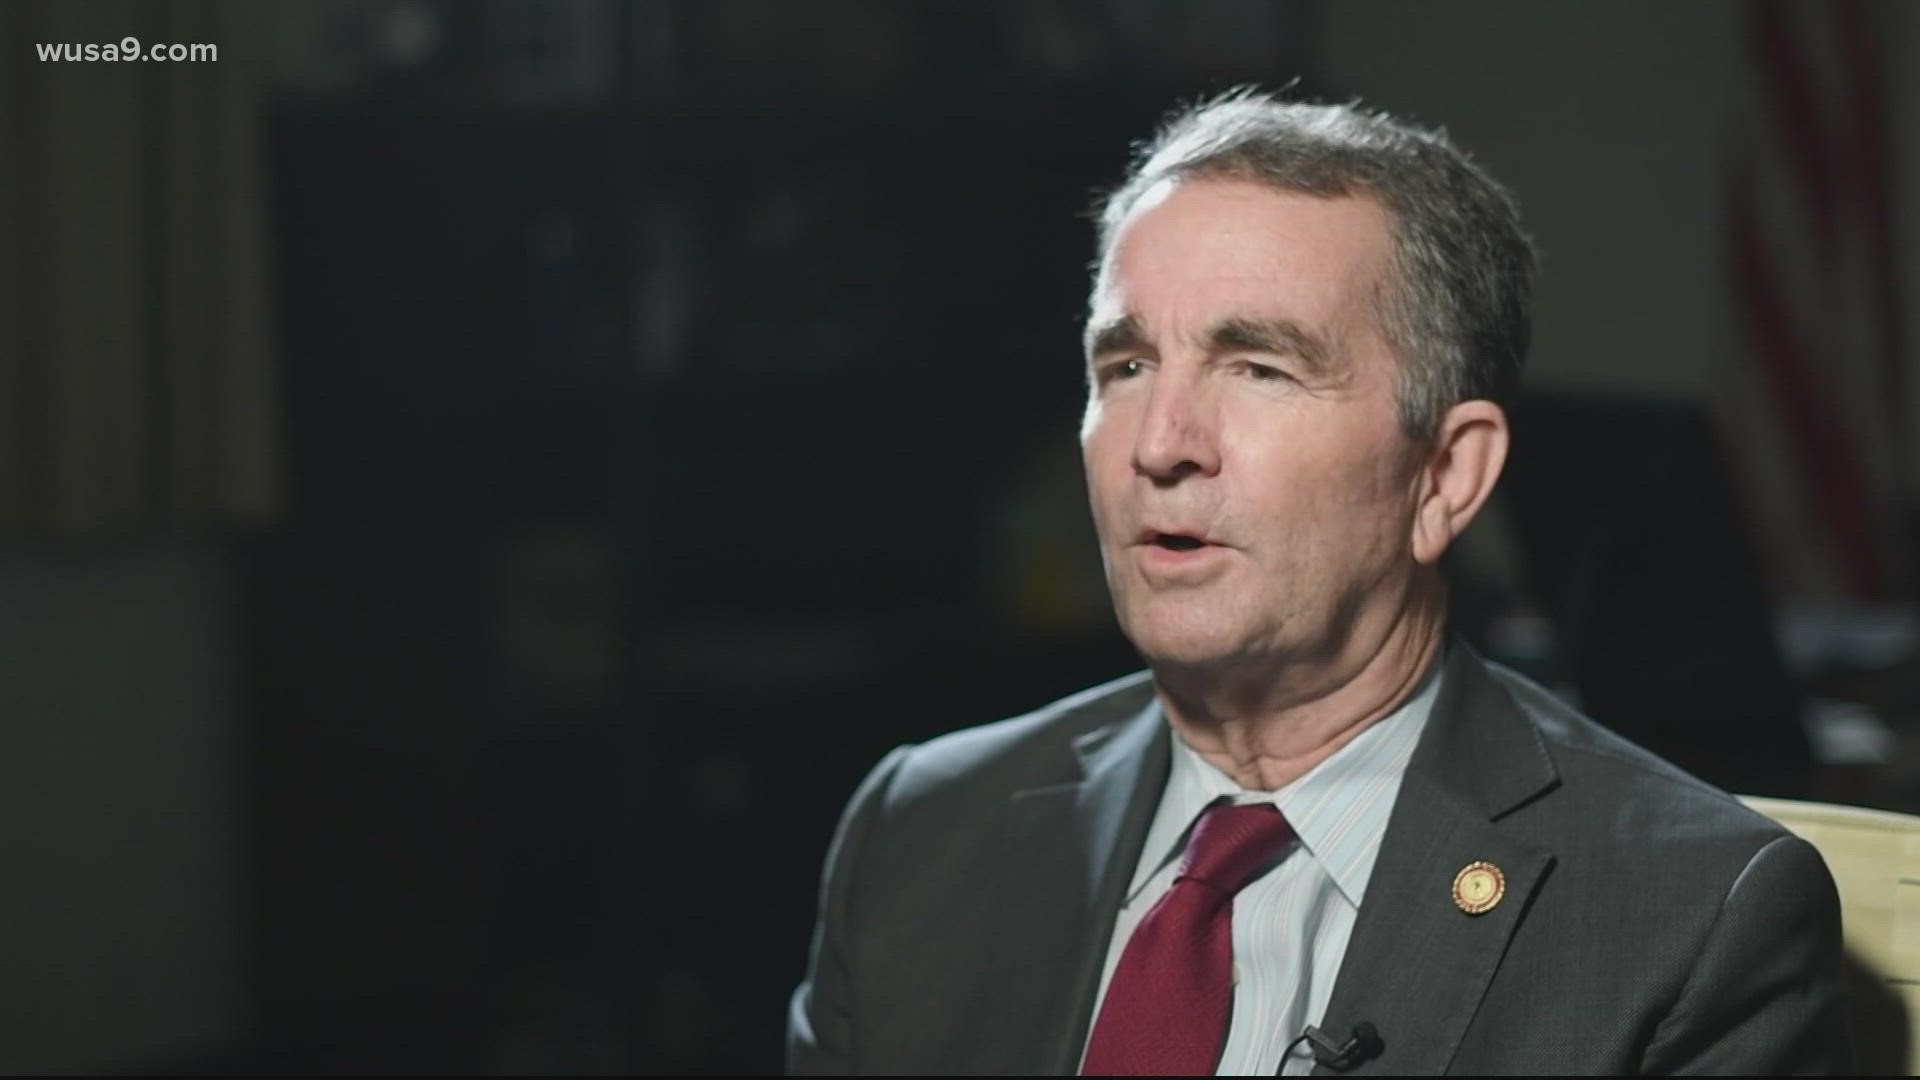 As his term as Virginia's governor comes to a close, Northam sat down with WUSA9's Lorenzo Hall.